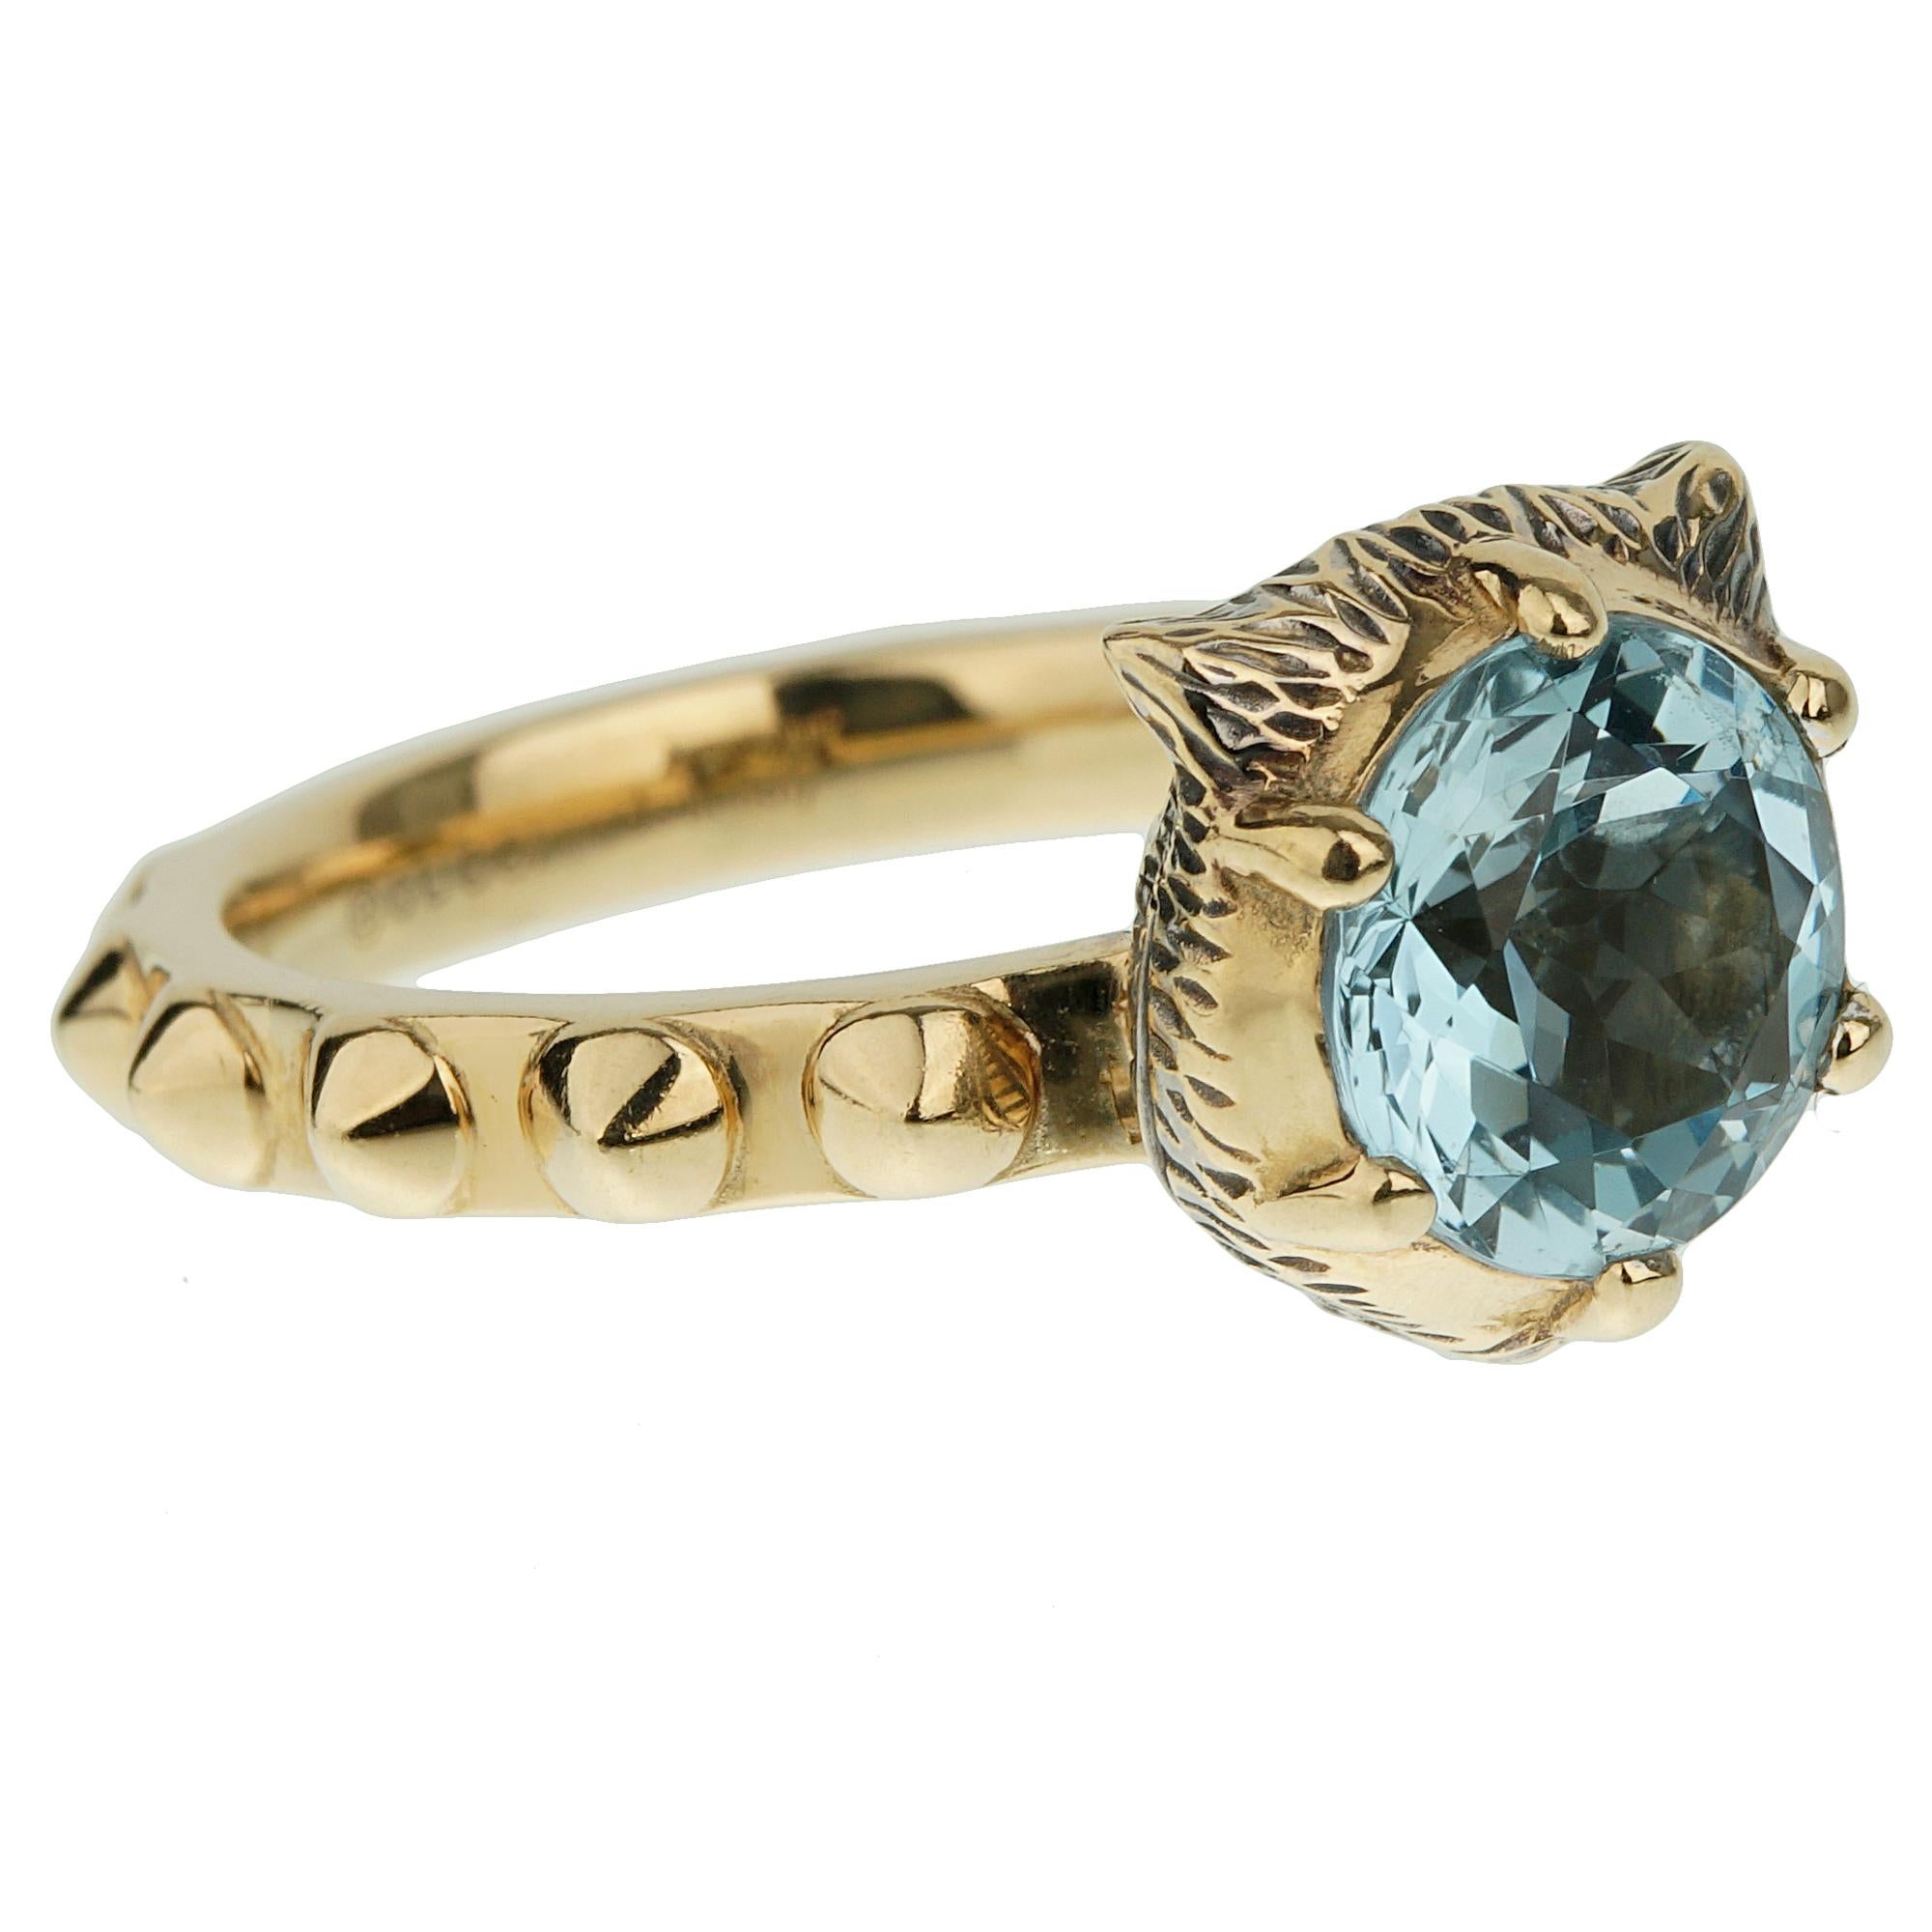 A stunning Gucci ring from the Le Marche Des Merveilles collection showcasing a 1.5ct blue topaz, on the reverse side is a Tiger adorned with 2 round brilliant cut diamonds set in 18k yellow gold.

The ring measures a size 6 1/4